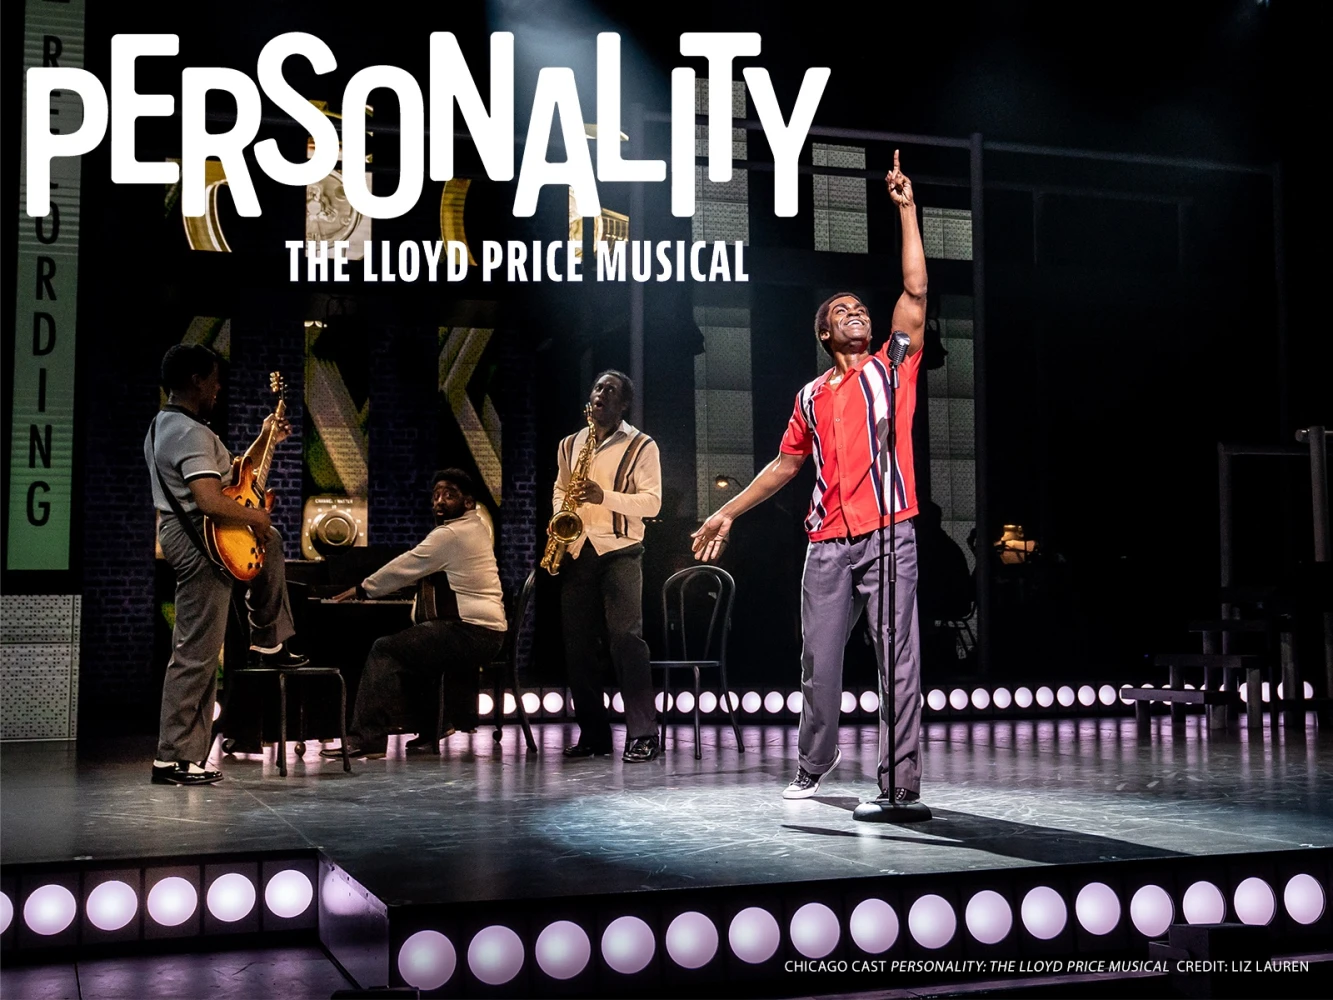 Personality: The Lloyd Price Musical: What to expect - 2